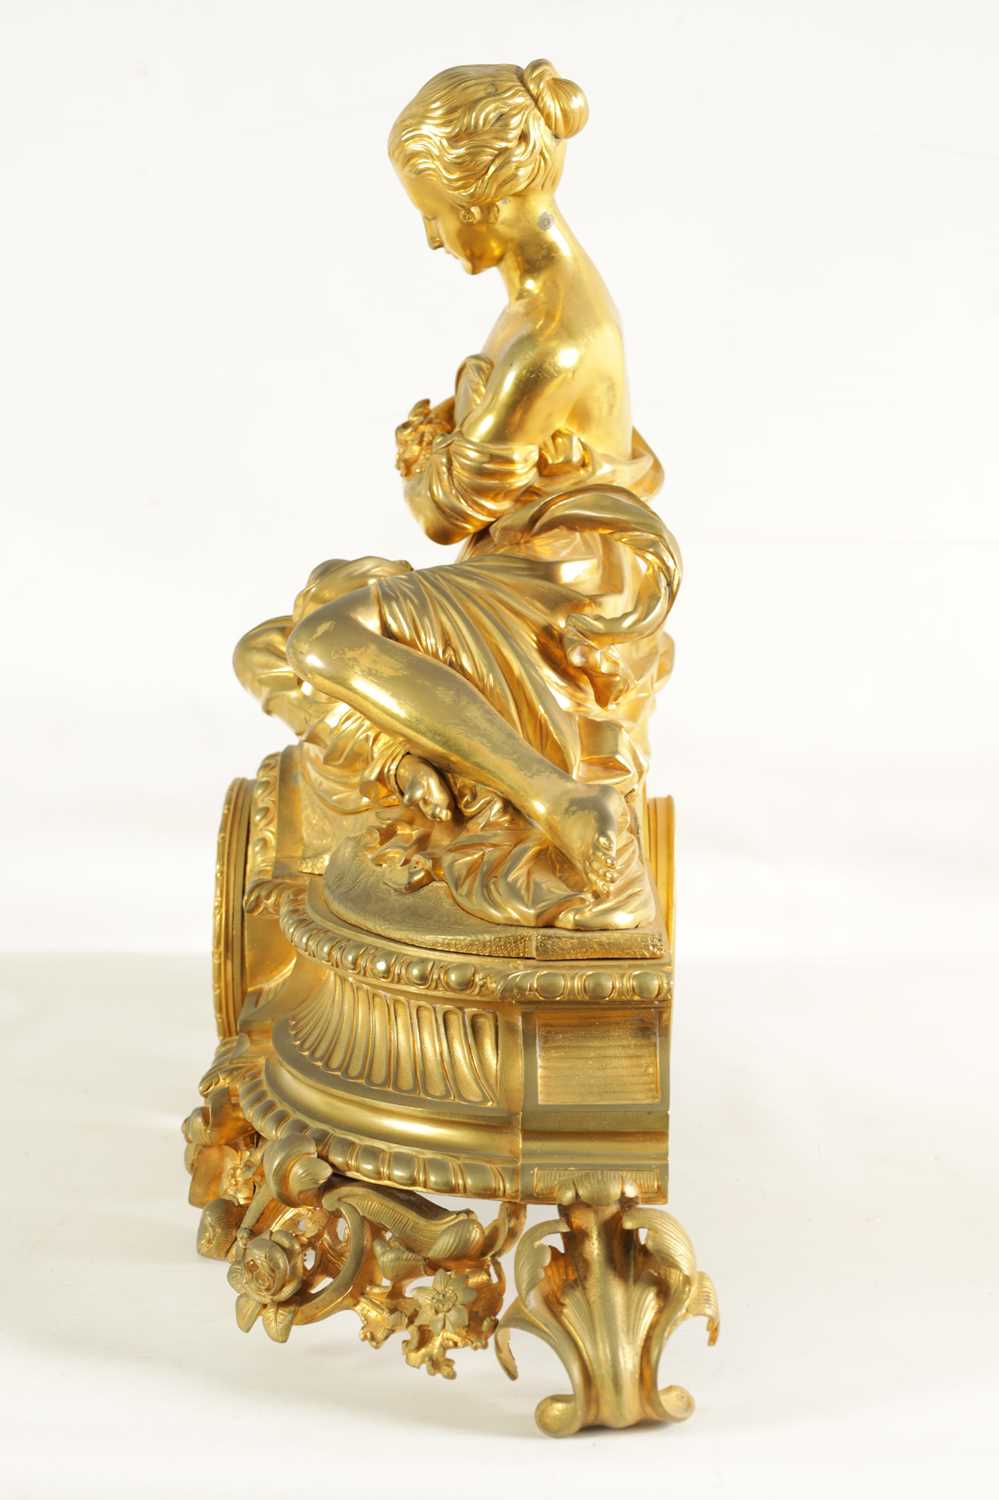 A LARGE 19TH CENTURY FRENCH FIGURAL ORMOLU MANTEL CLOCK - Image 7 of 11